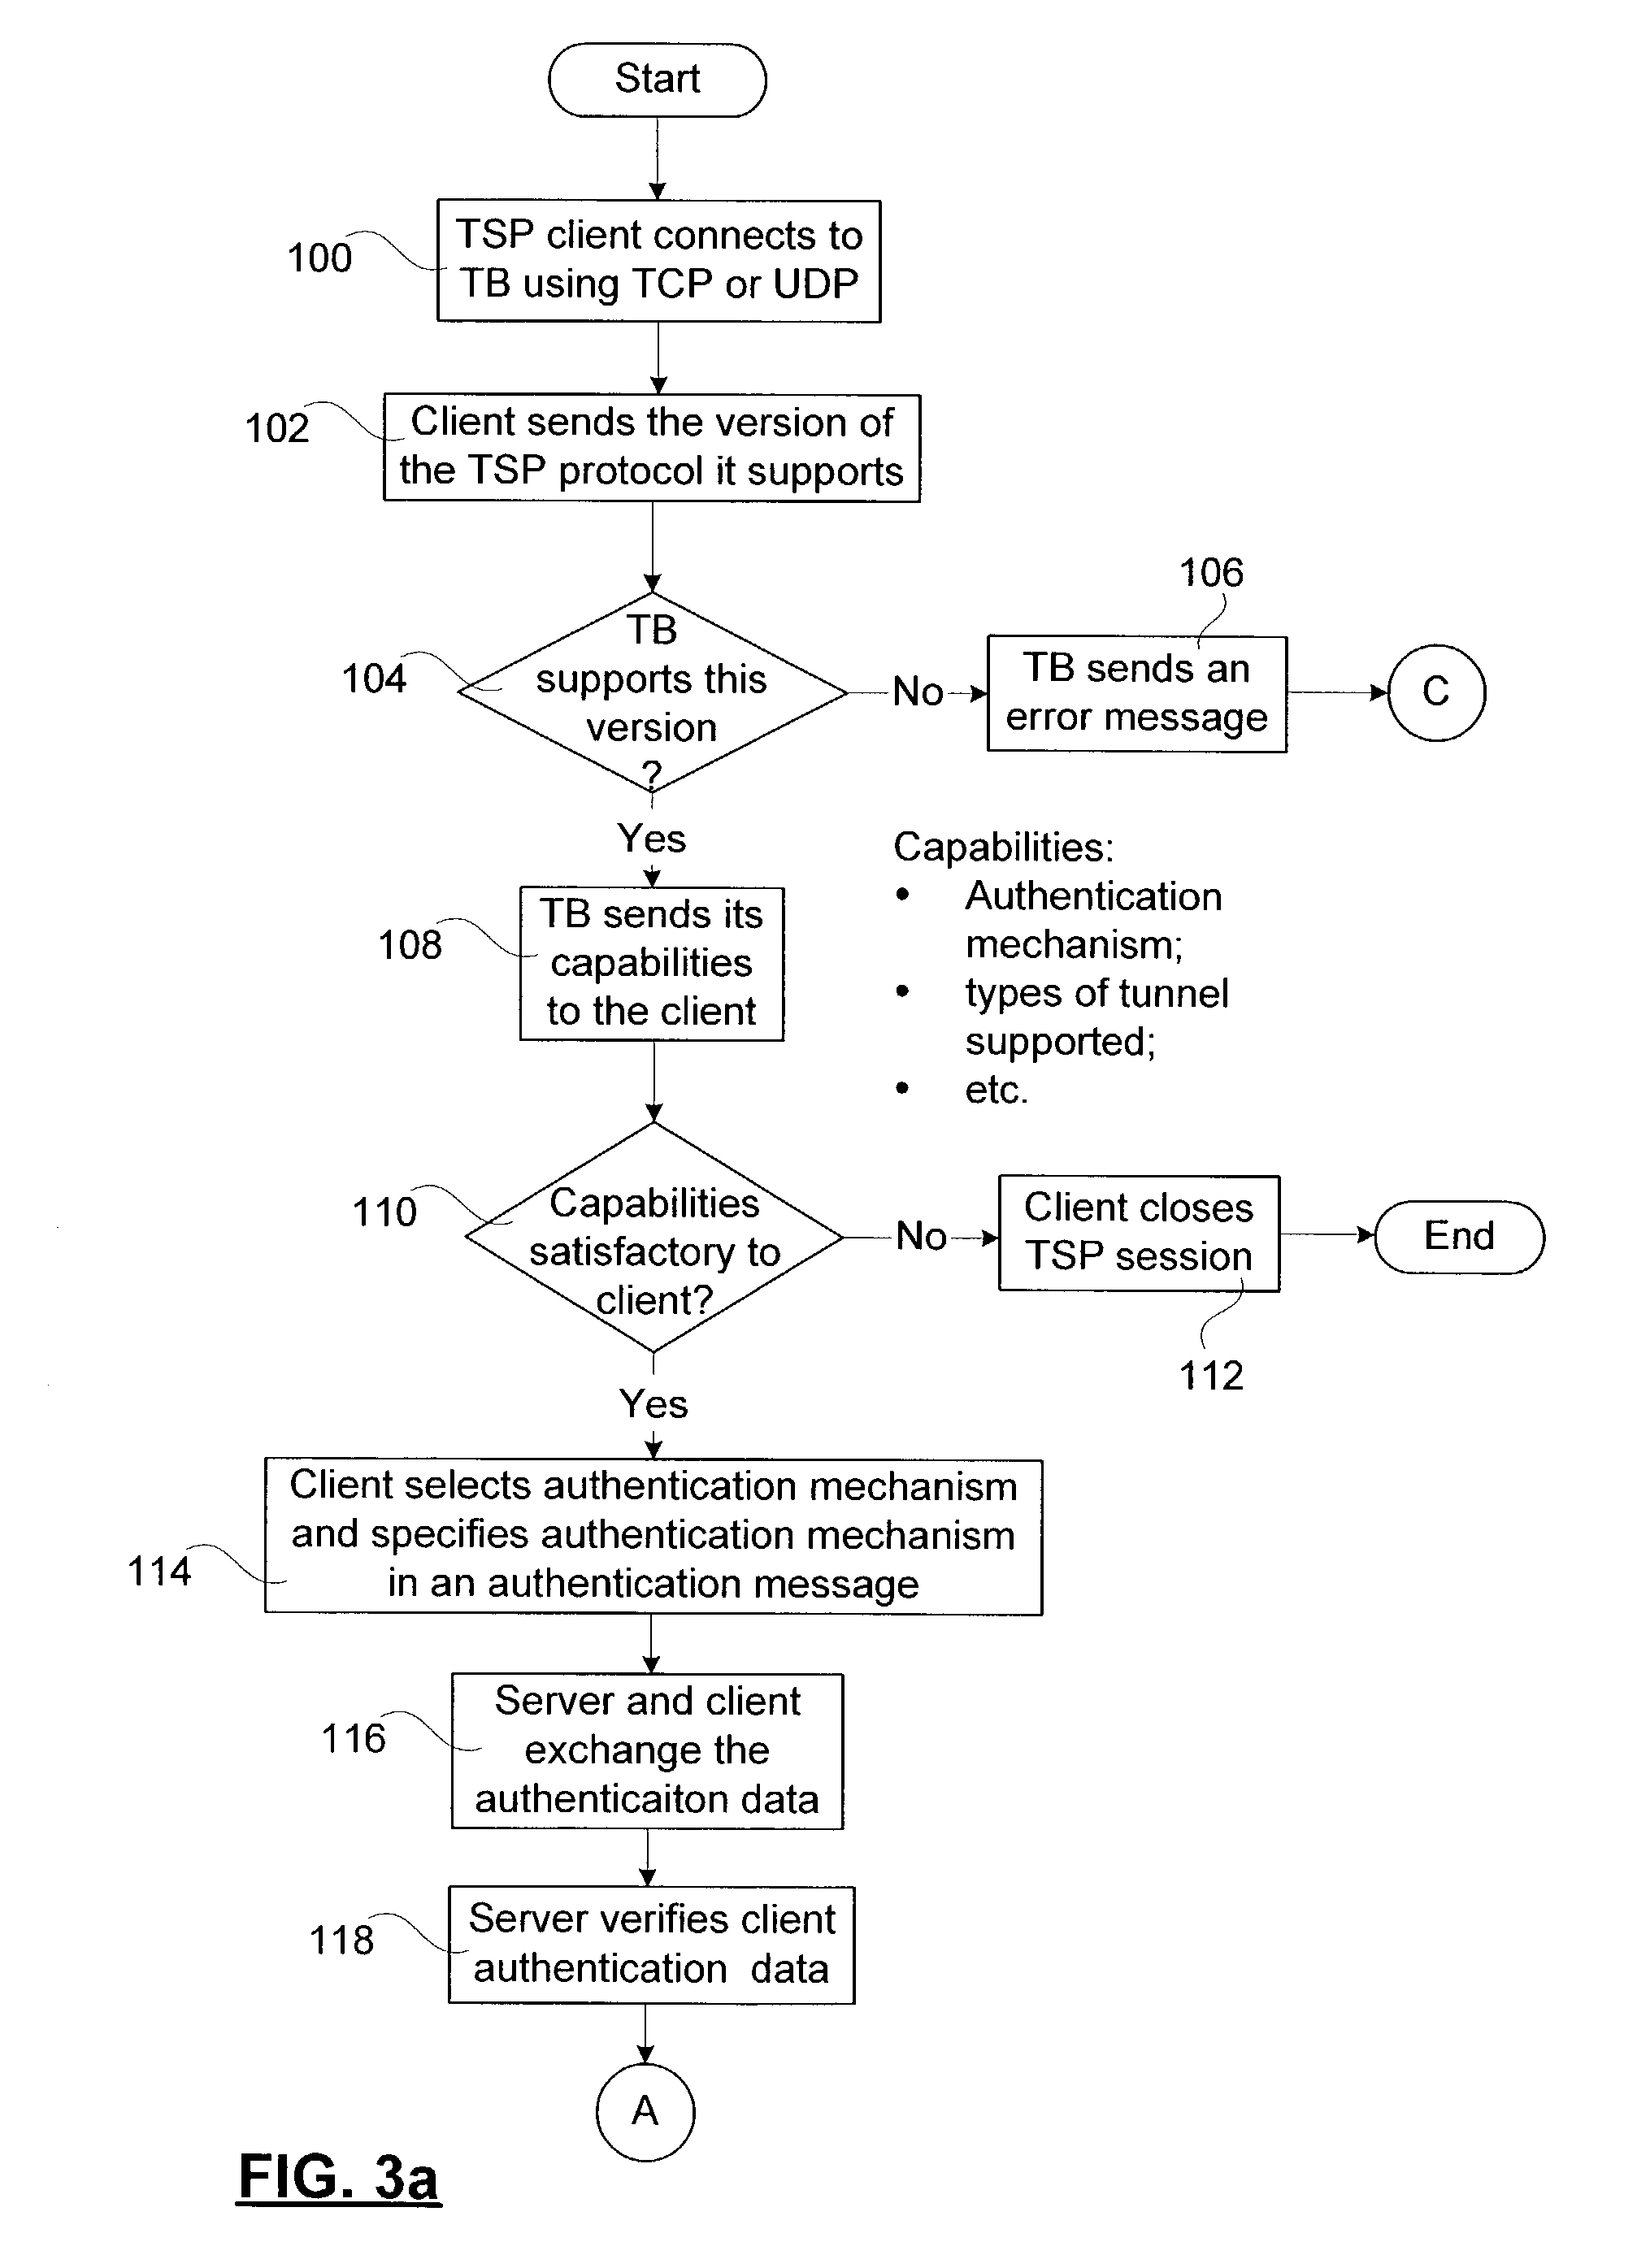 Method and apparatus for connecting IPv6 devices through an IPv4 network using a tunneling protocol